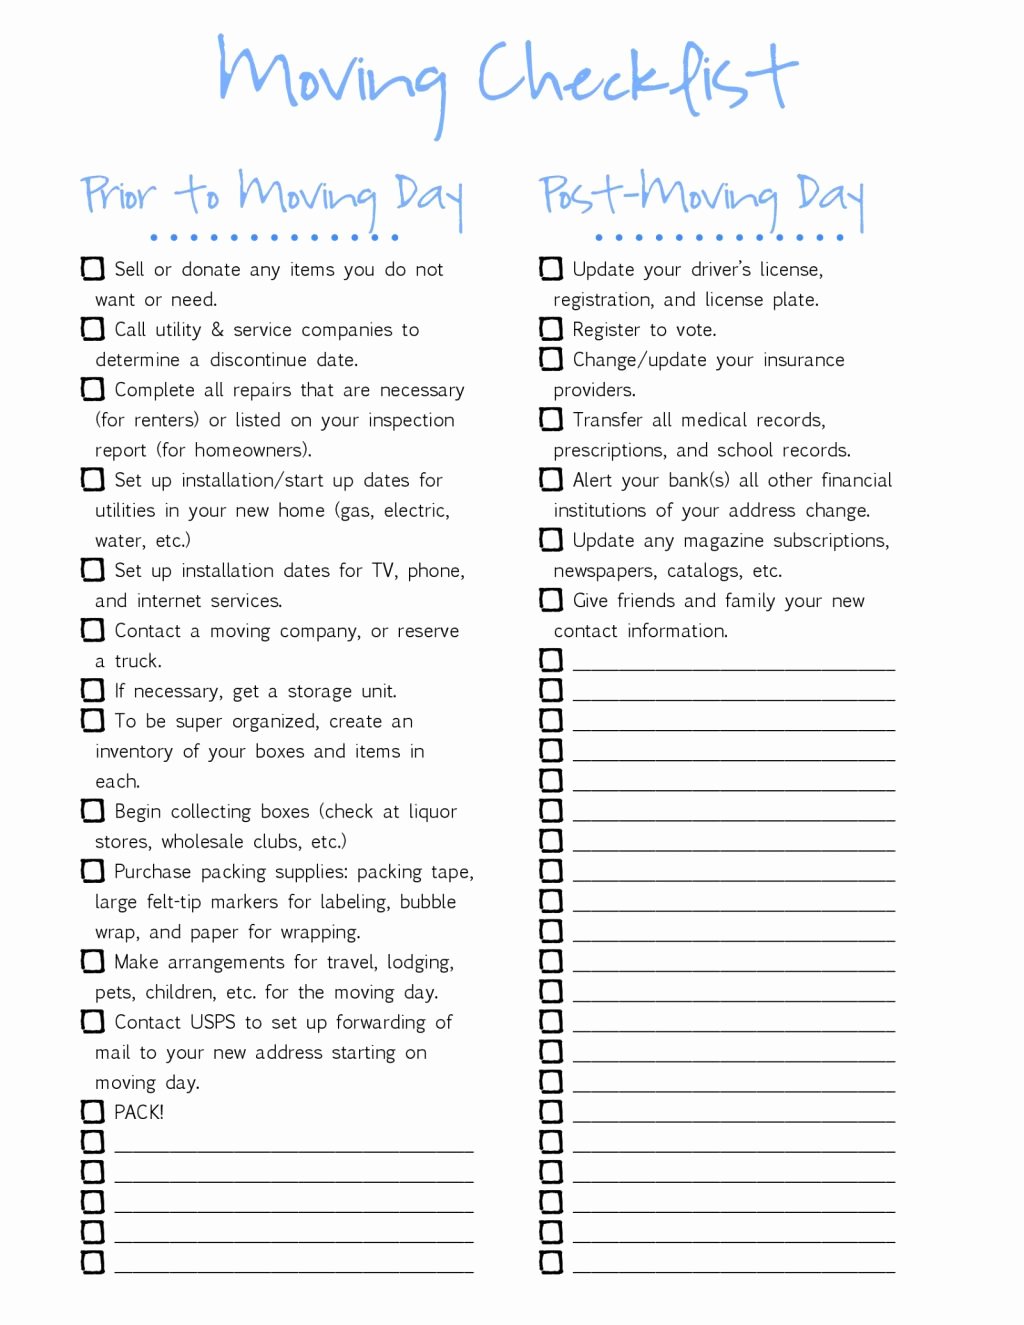 Business Moving Checklist Template Awesome Business Moving Checklist